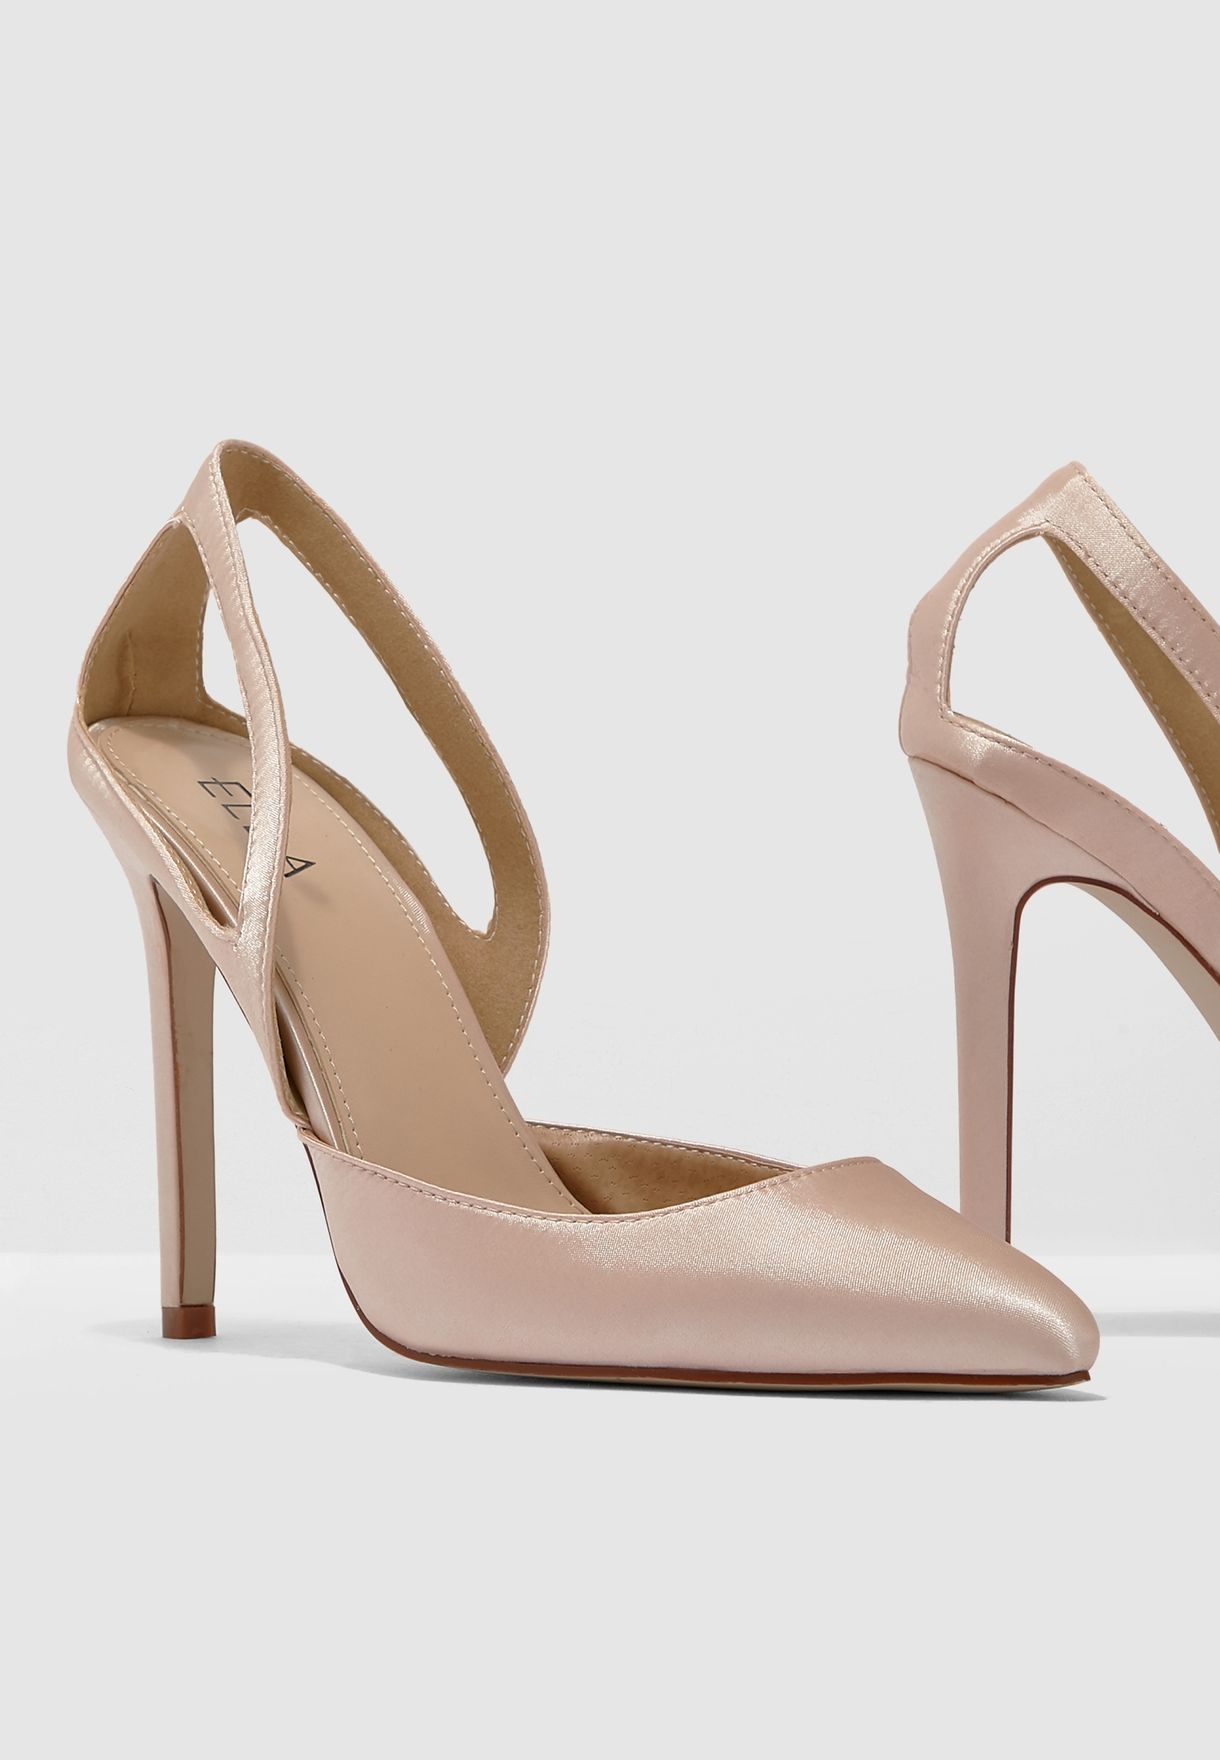 pointed toe court shoes